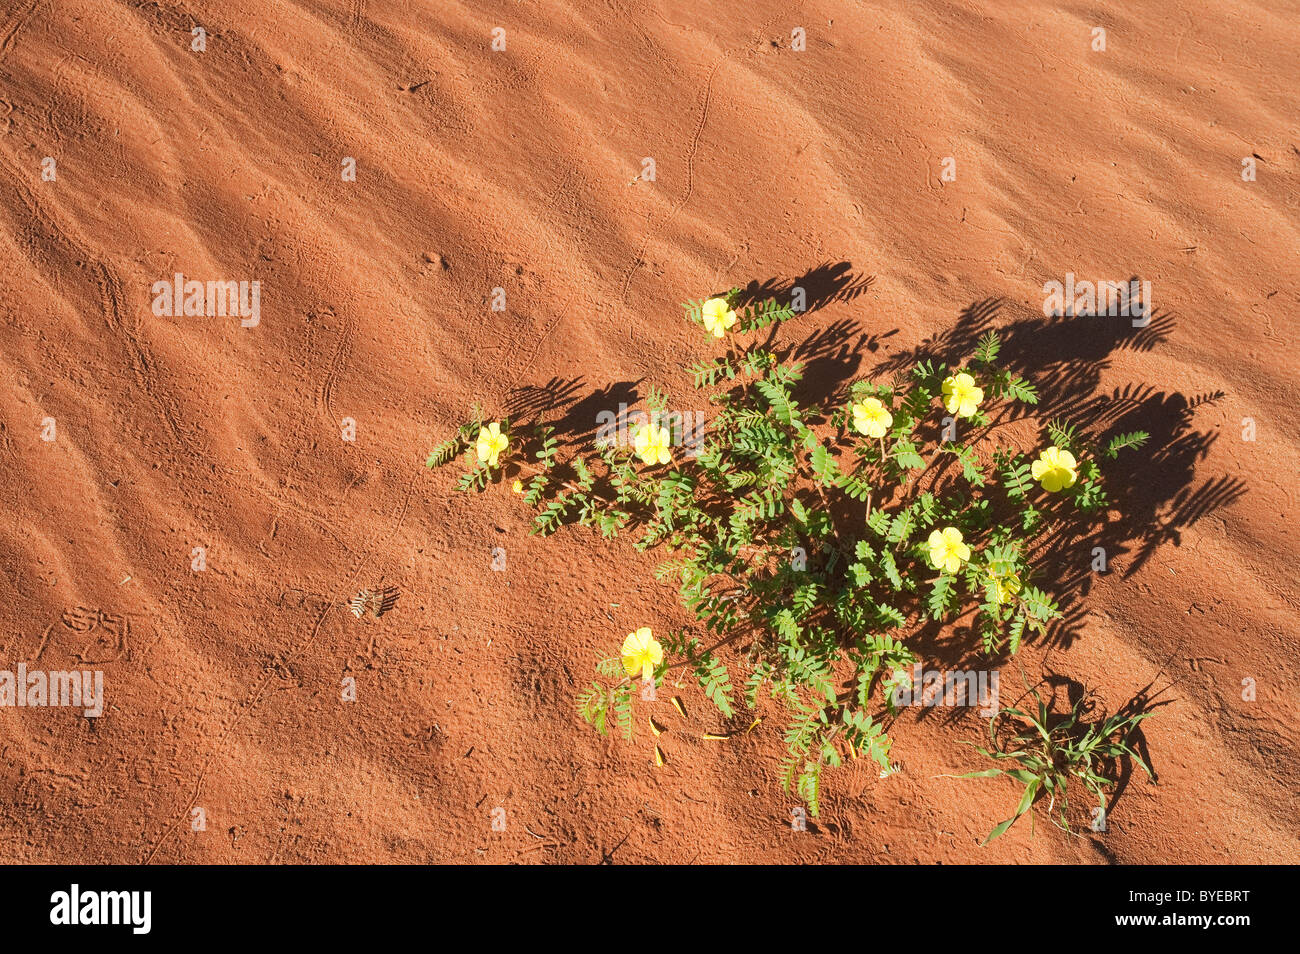 Devils Thorn (Tribulus zeyheri). Blooming at a sand dune in the Namib Desert during the rainy season (March). Namibia. Stock Photo